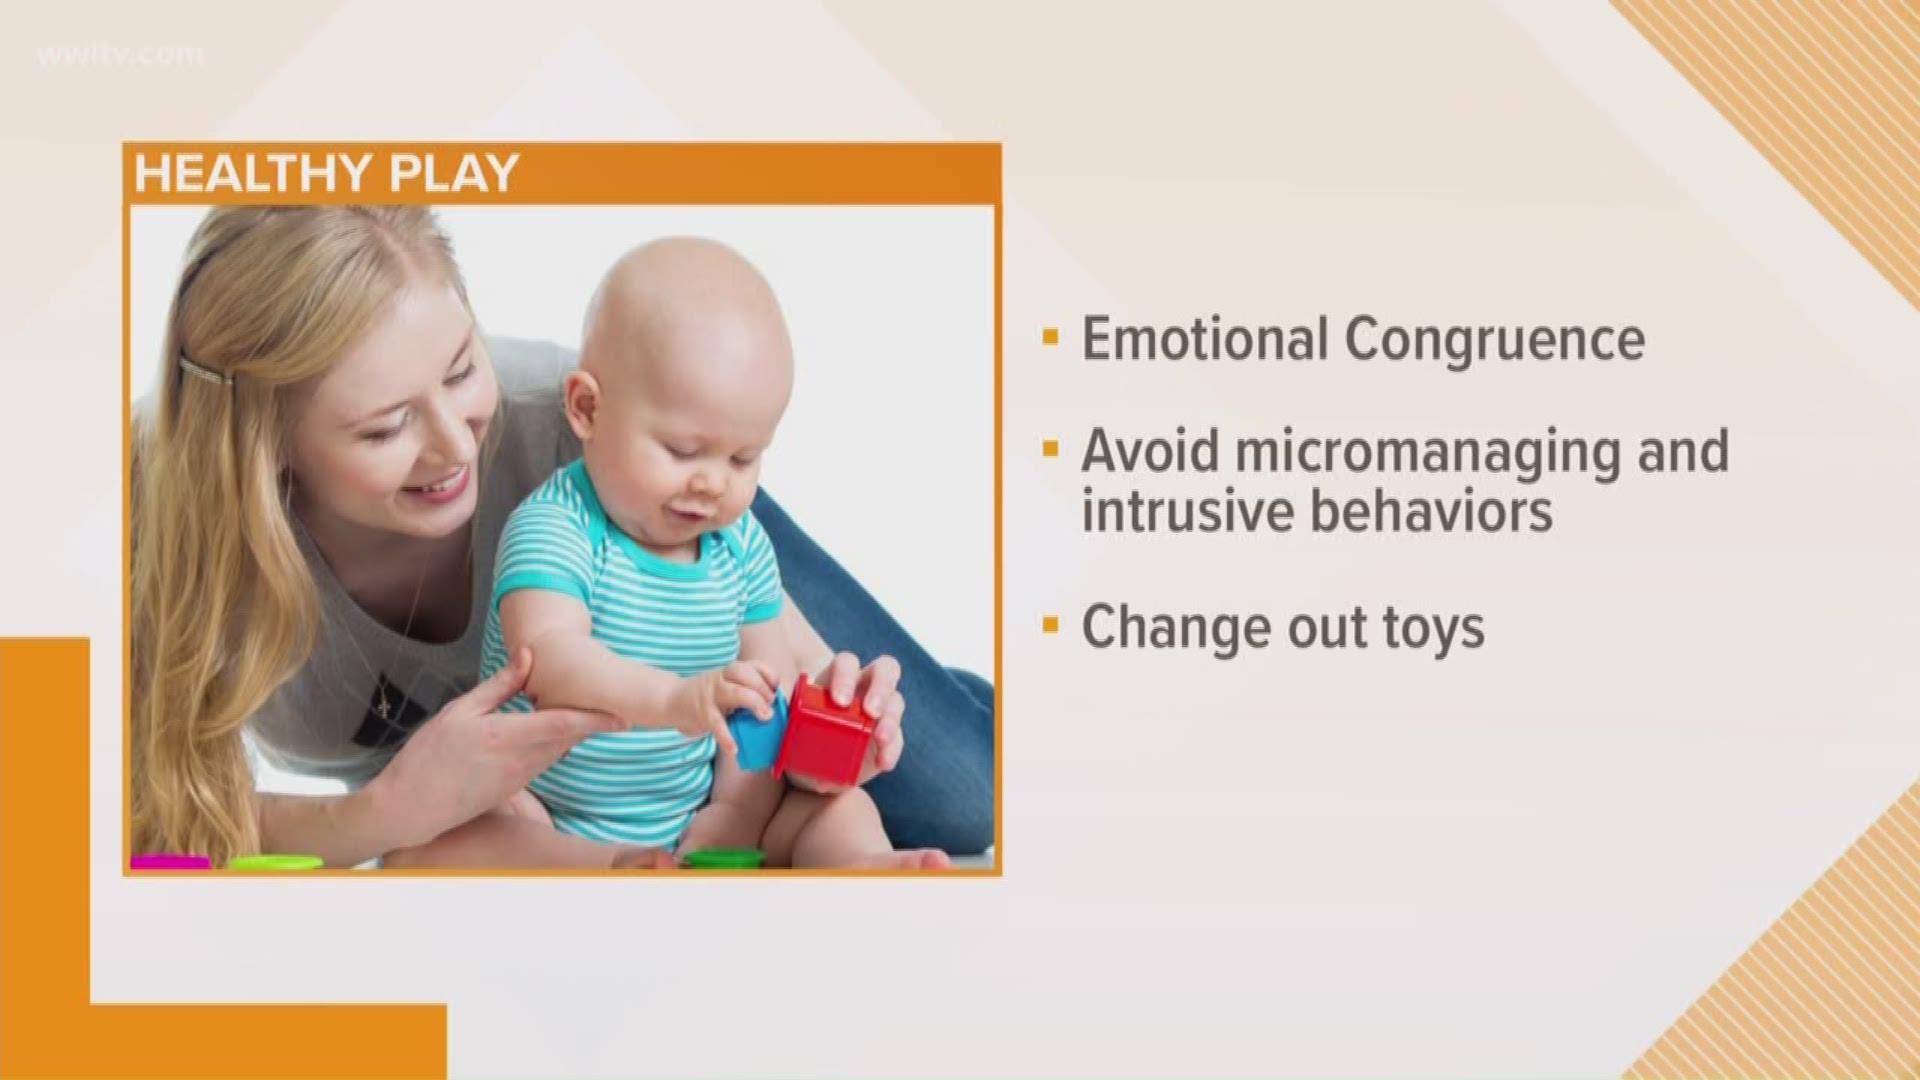 Camille Quinn from the Parenting Center in Children's Hospital talks about how to incorporate play time for your child everyday.